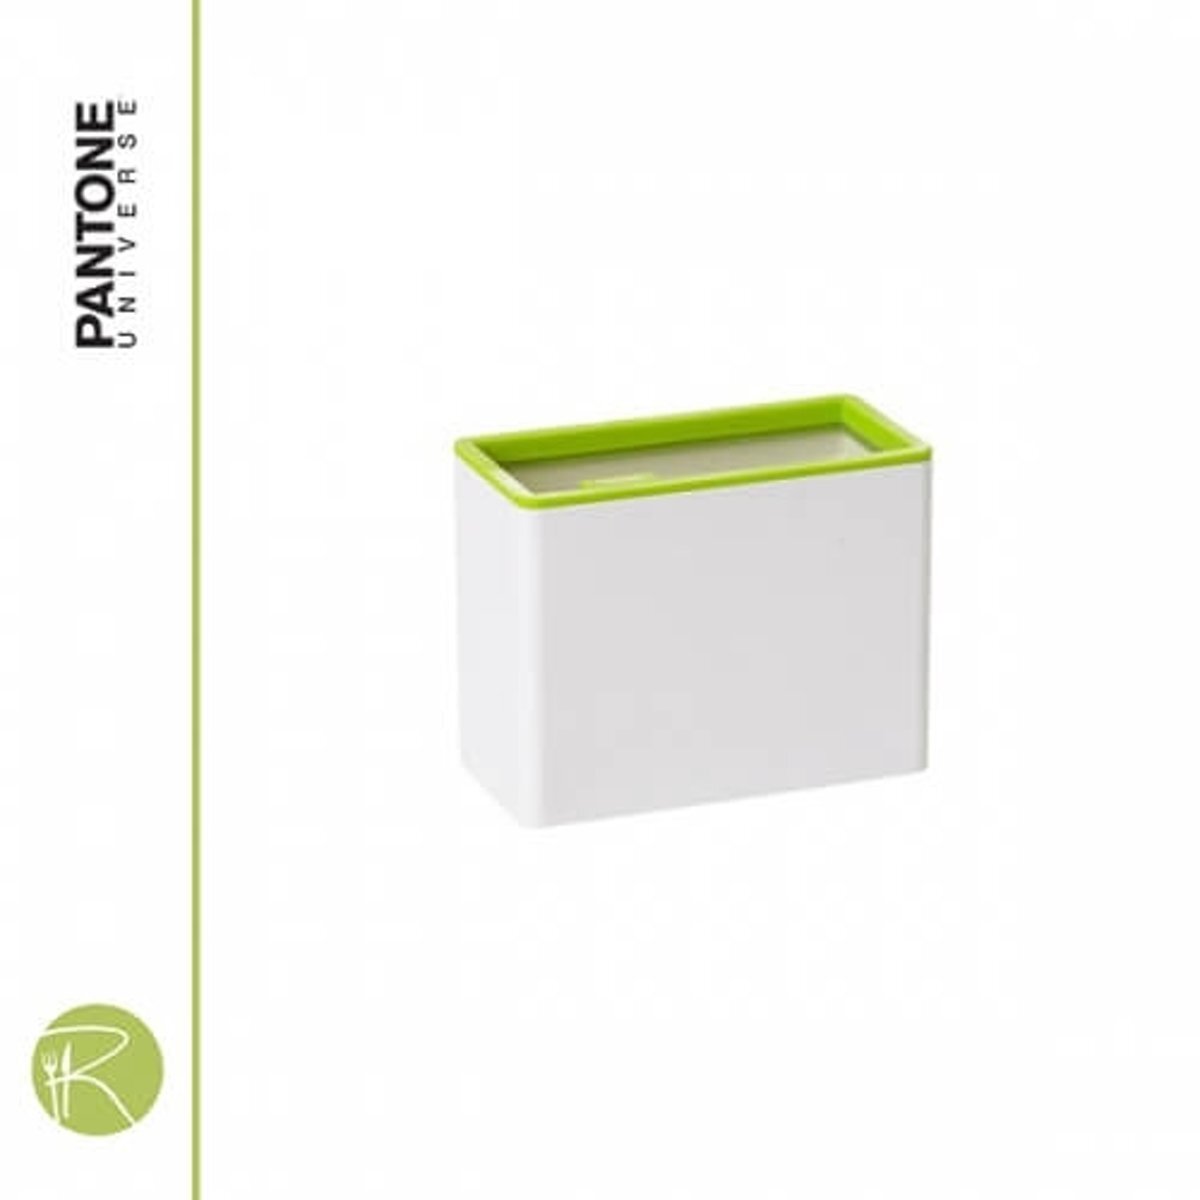 Pantone Universe voedselcontainer - Voedselcontainer - - macaw green